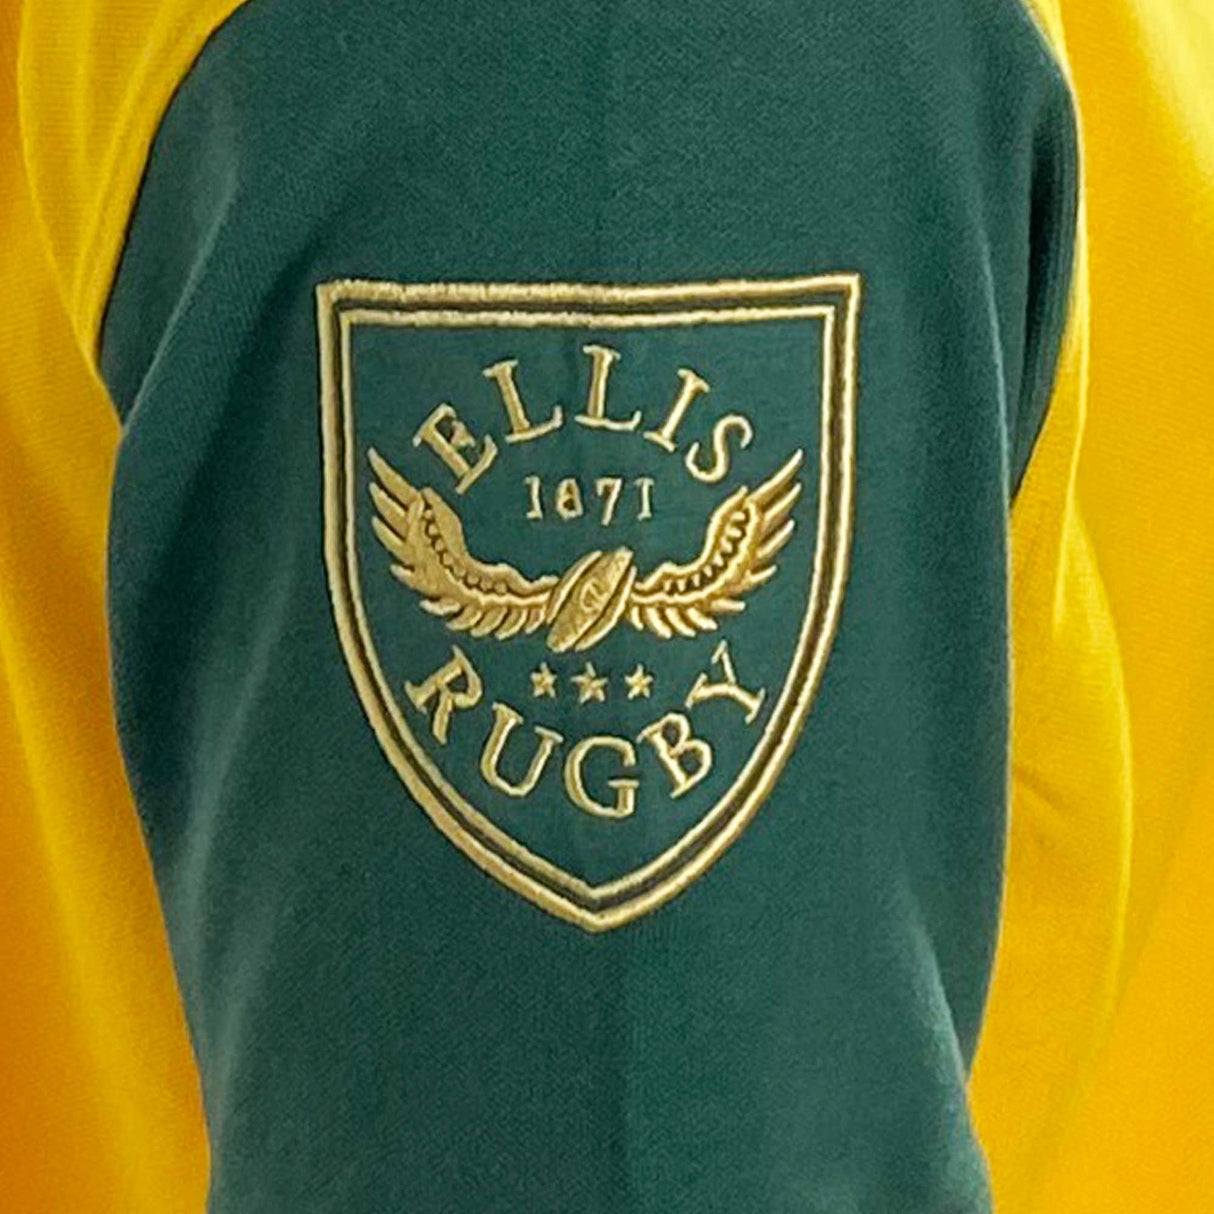 Ellis Rugby Australia Rugby Polo 1987 |Polo Shirt | Ellis Rugby | Absolute Rugby